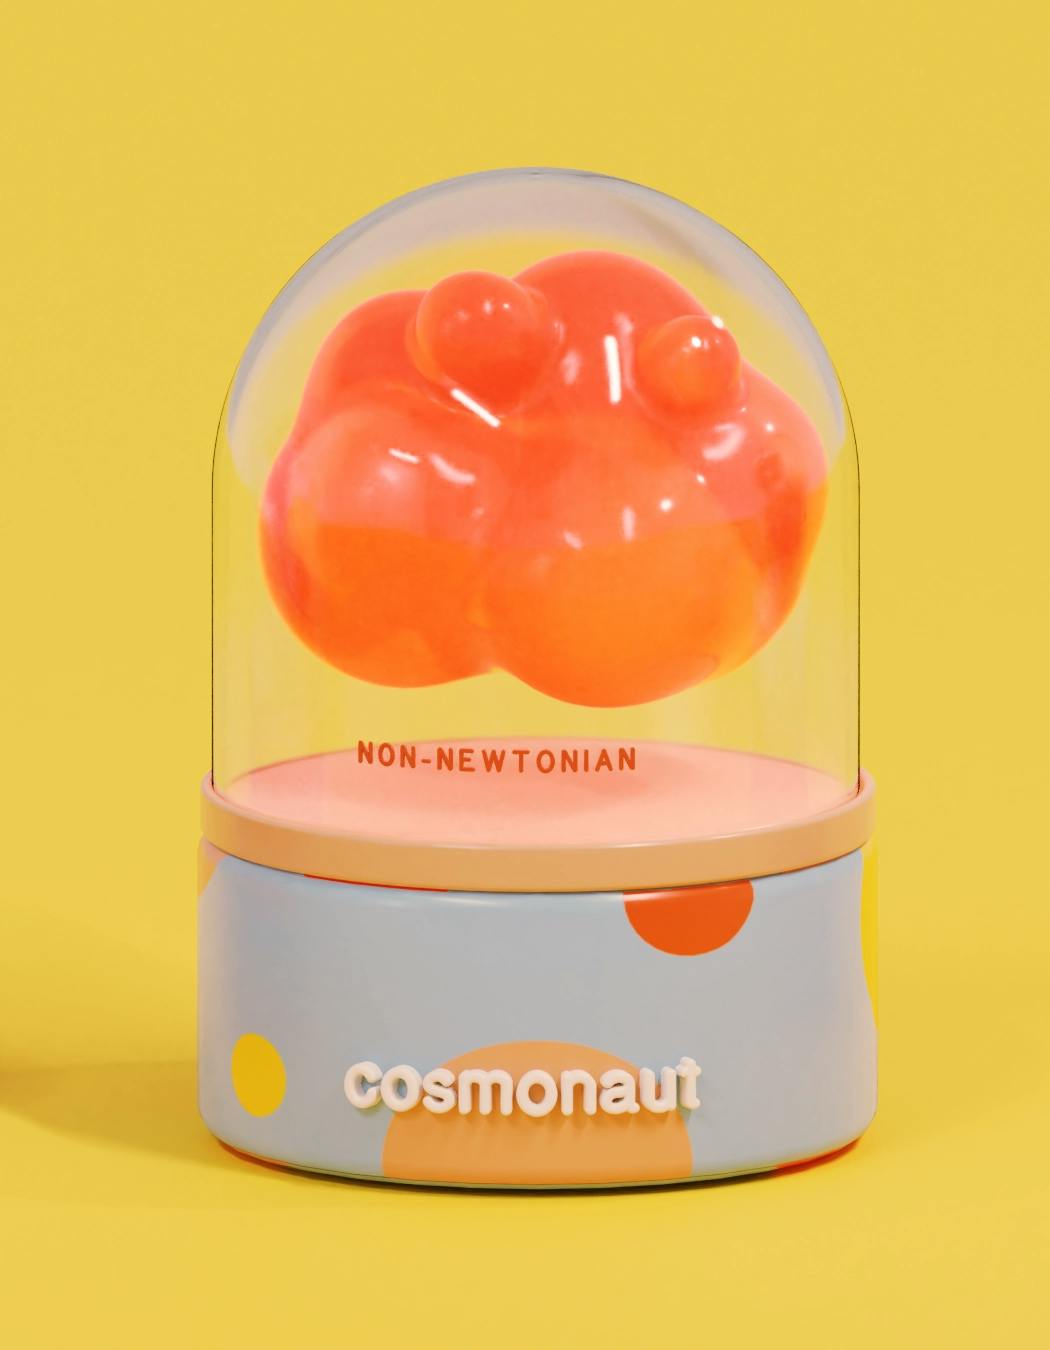 a floating bumpy form floats in its capsule, made up of spheres clumped together. the texture is akin to jelly. the label on the capsule reads, 'non-newtonian'.